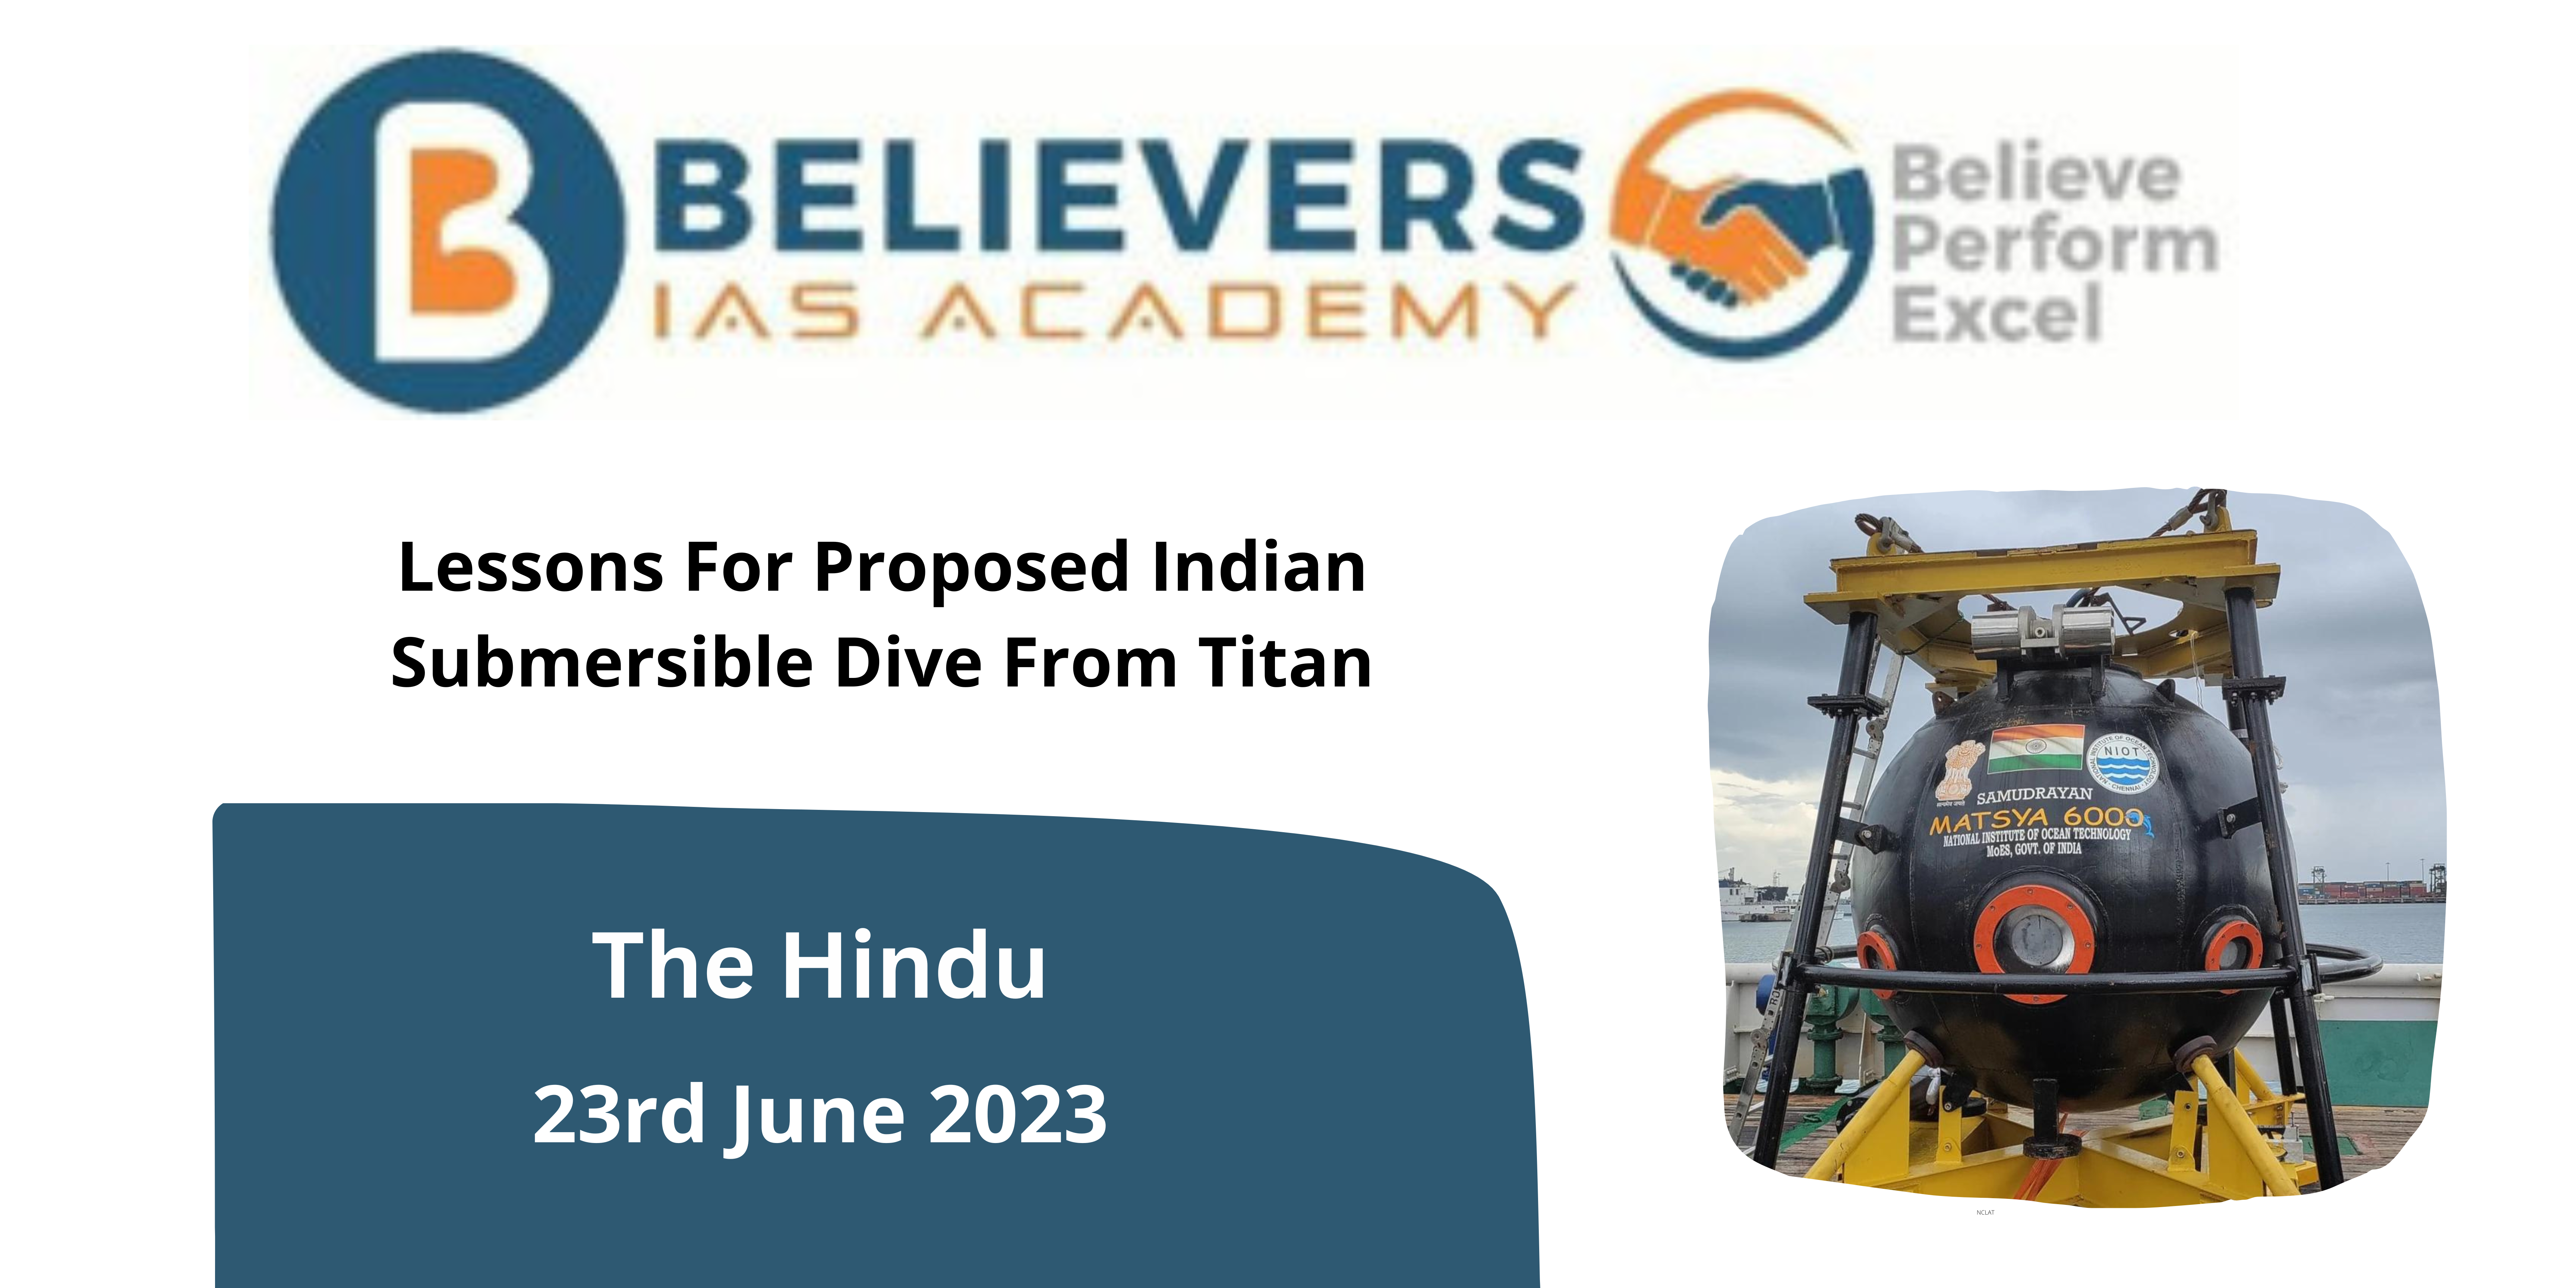 Lessons For Proposed Indian Submersible Dive From Titan